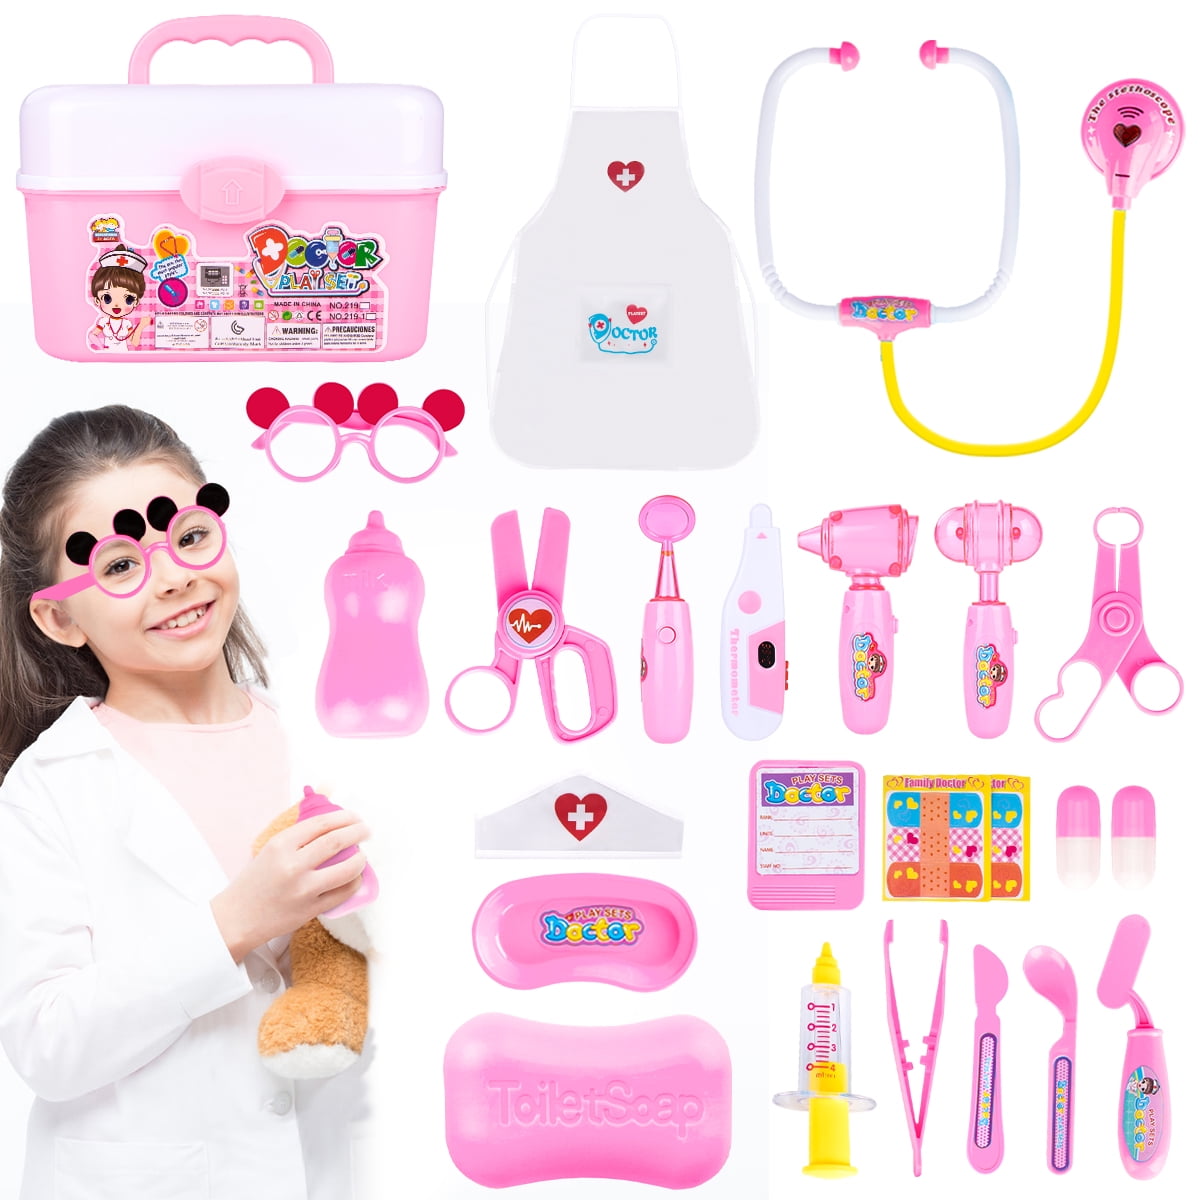  Hydeem Super Smile Toy Doctor Kit for Toddlers 3-5 Years Old  Girls Boys, Kids Doctor Playset with Pretend Play Set of Dress up Costume,  Teeth and Dental Accessories (24pcs) : Toys